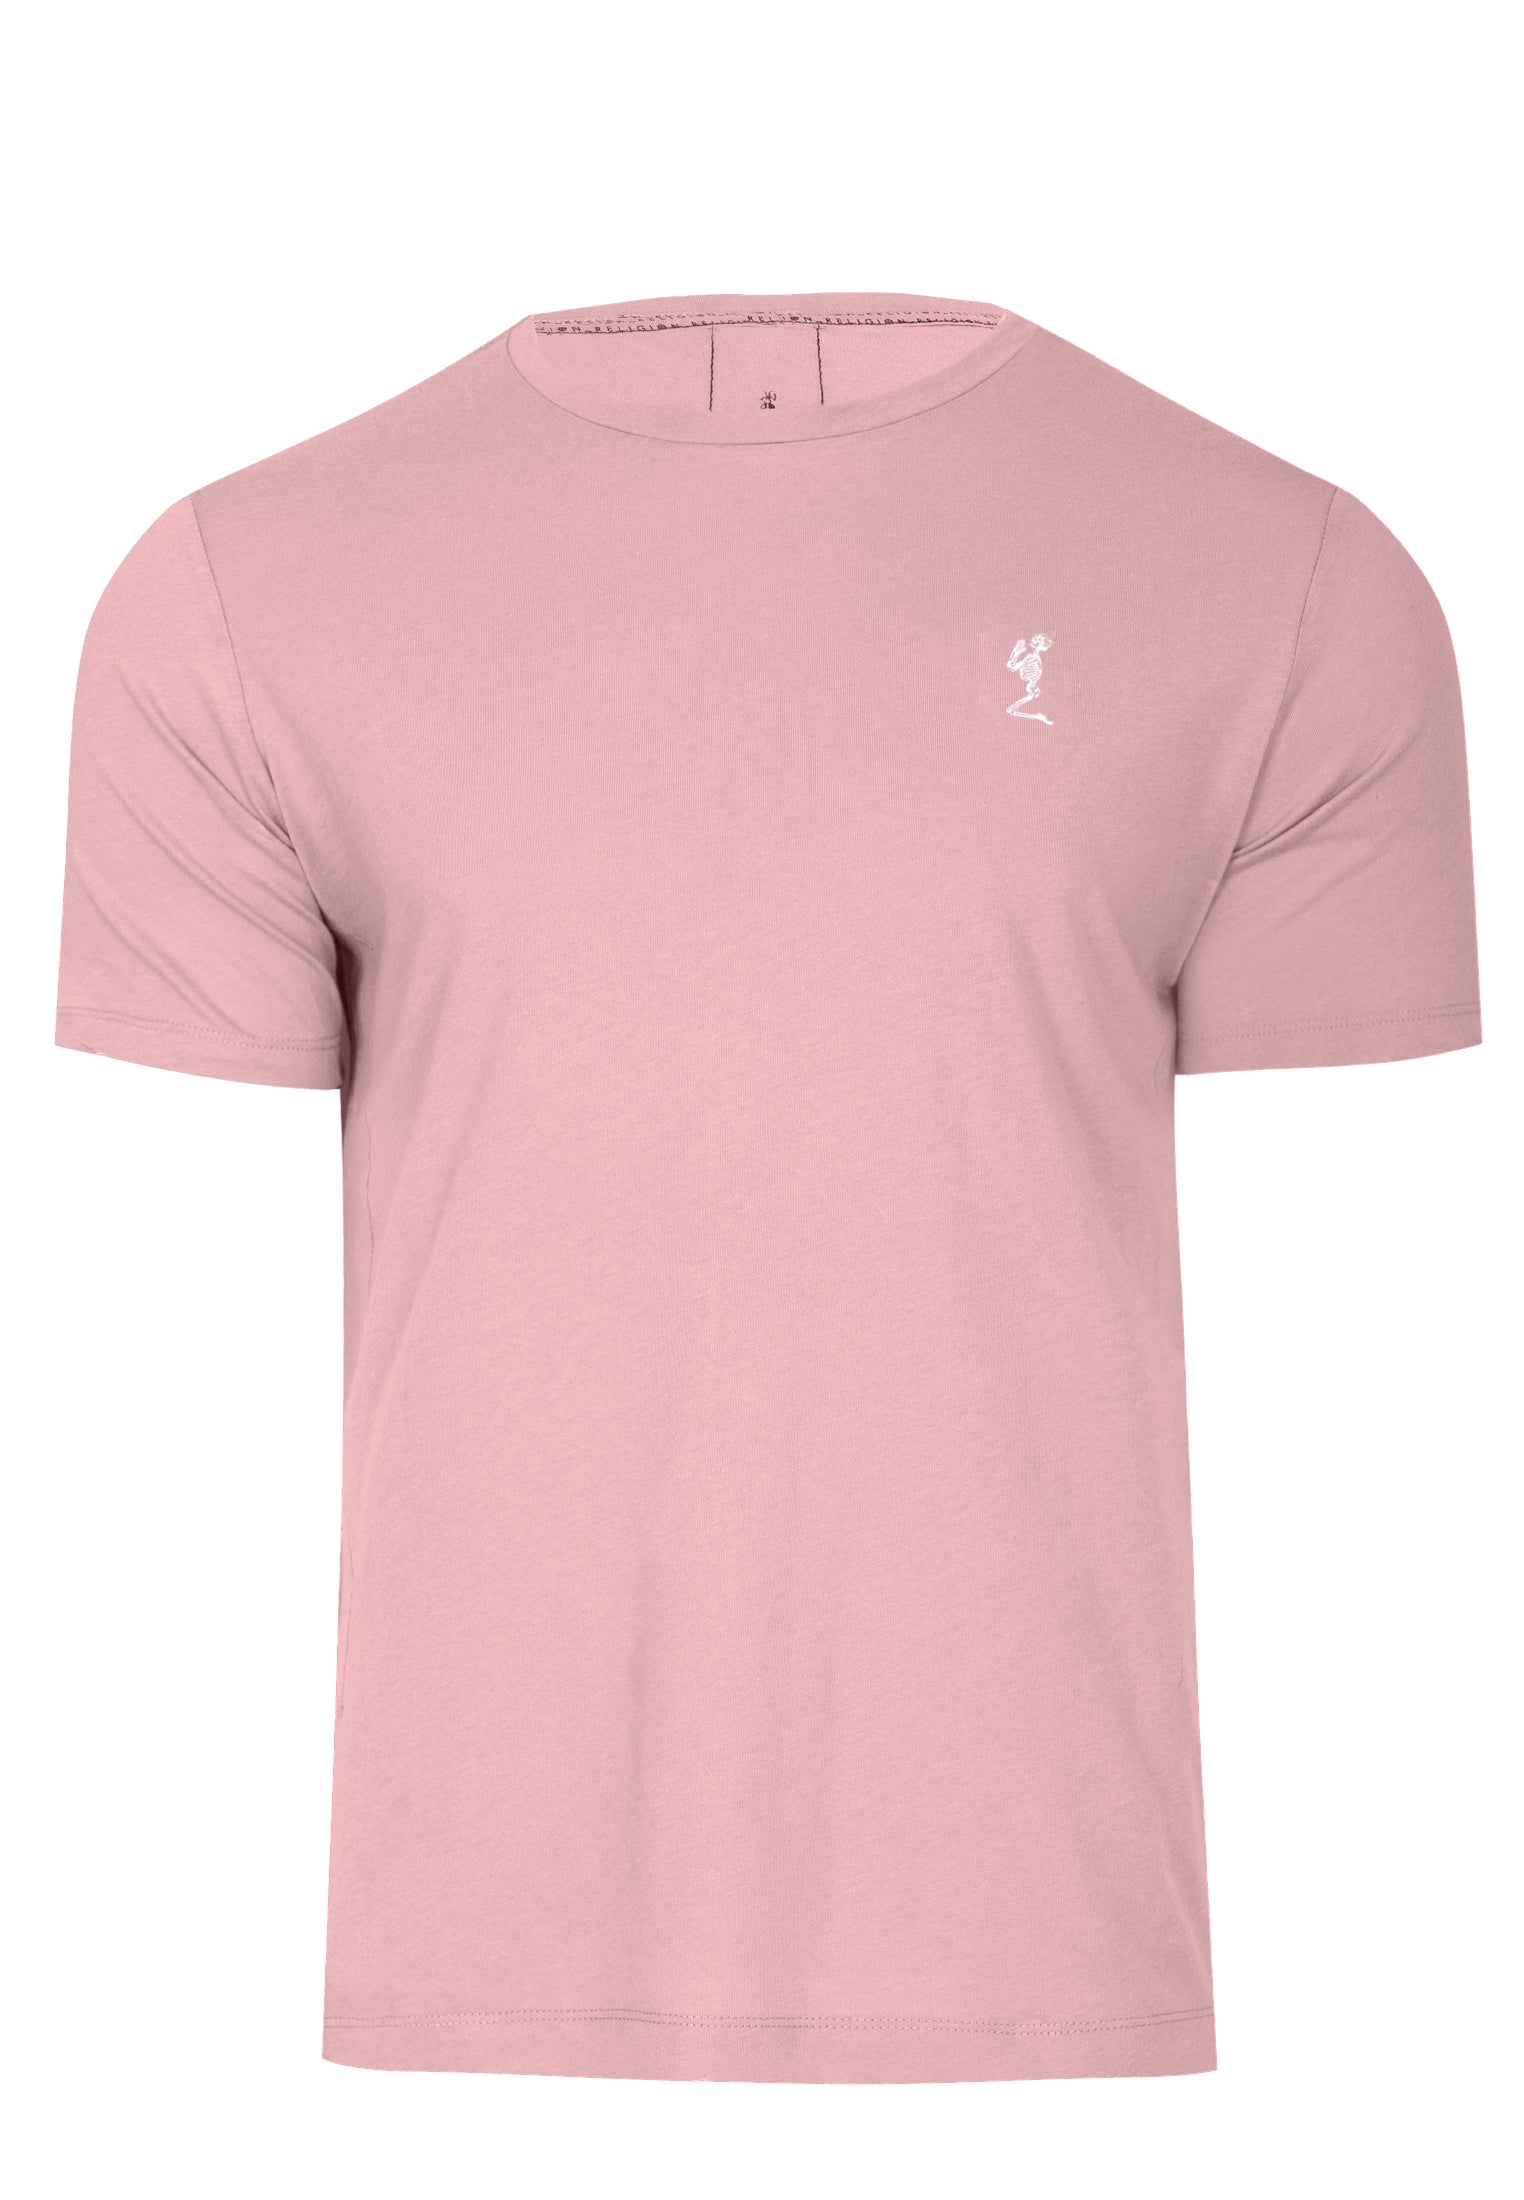 ESSENTIAL CORE PALE PINK T-SHIRT